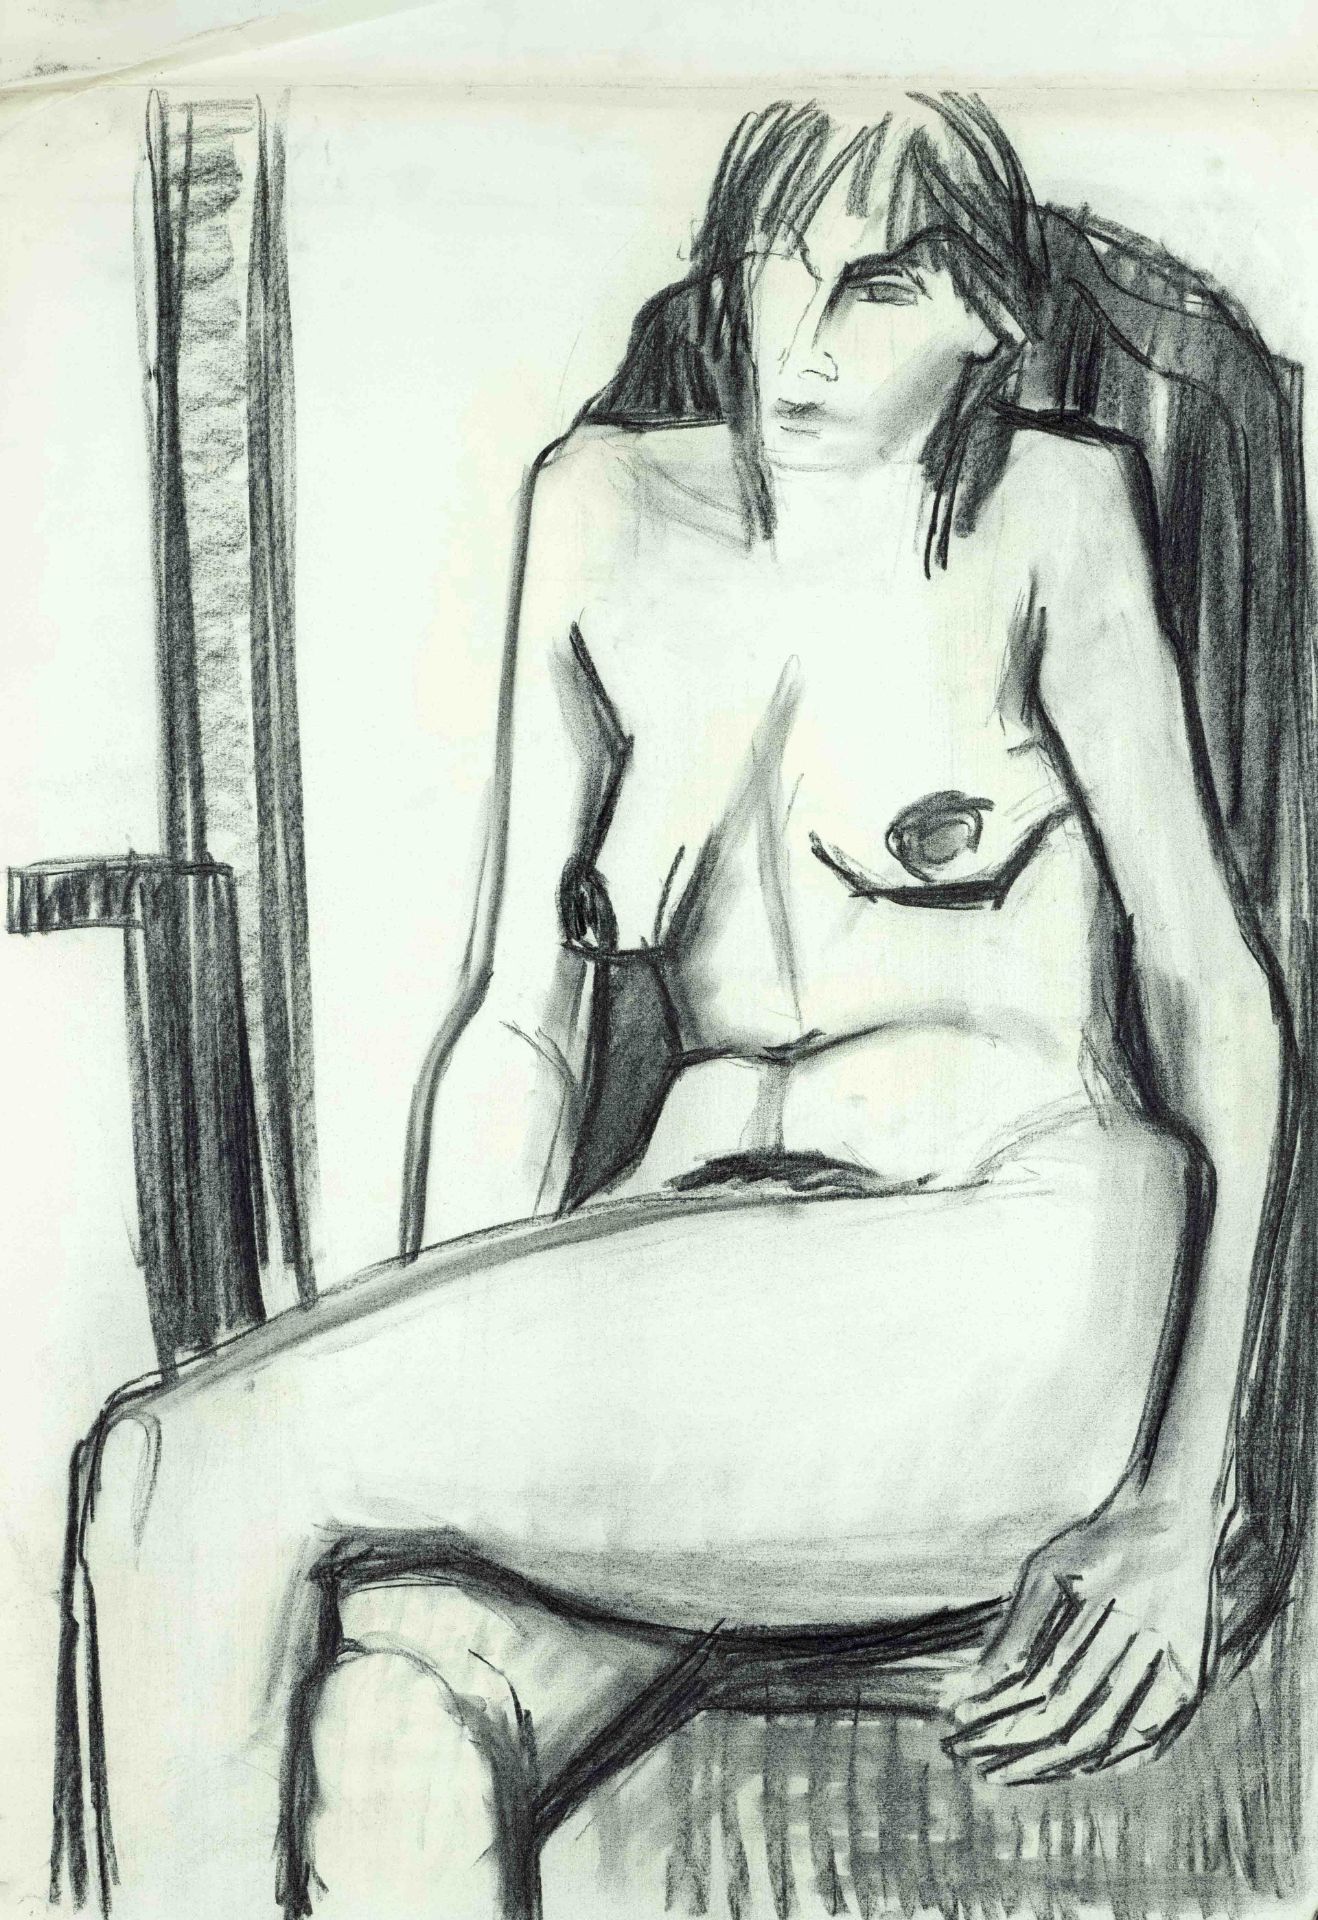 Marion Kallauka (*1949), 11 charcoal drawings by the Darmstadt-born artist, who studied in Berlin - Image 4 of 5